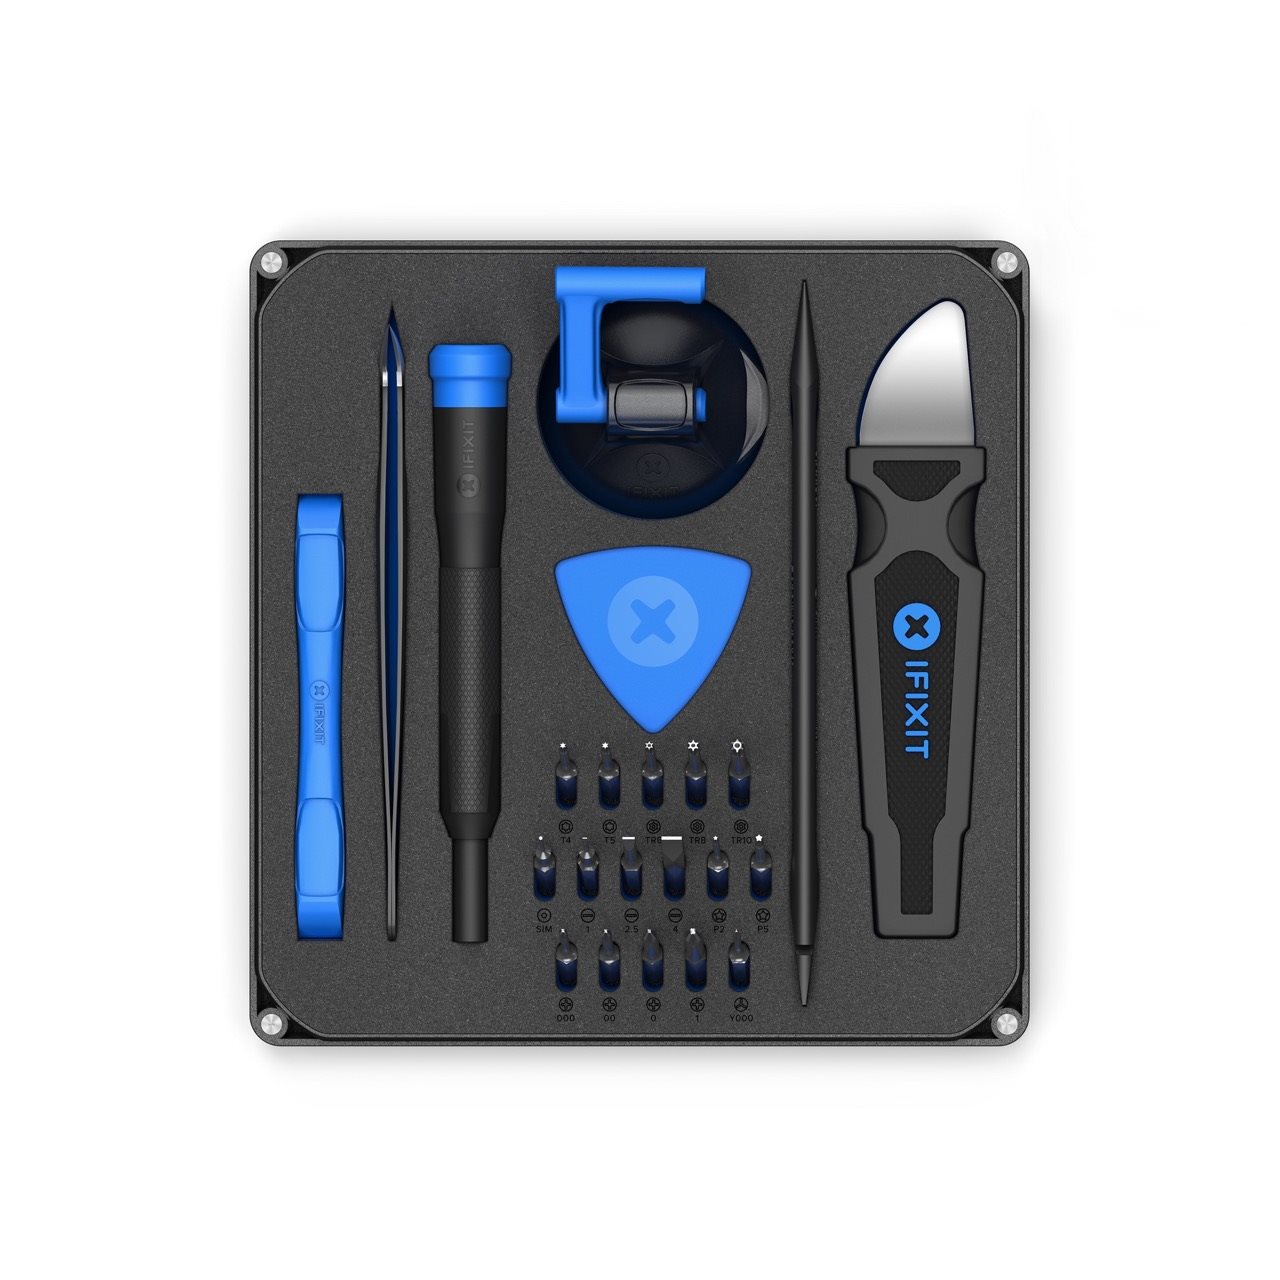 iFixit Essential Electronics Toolkit V2